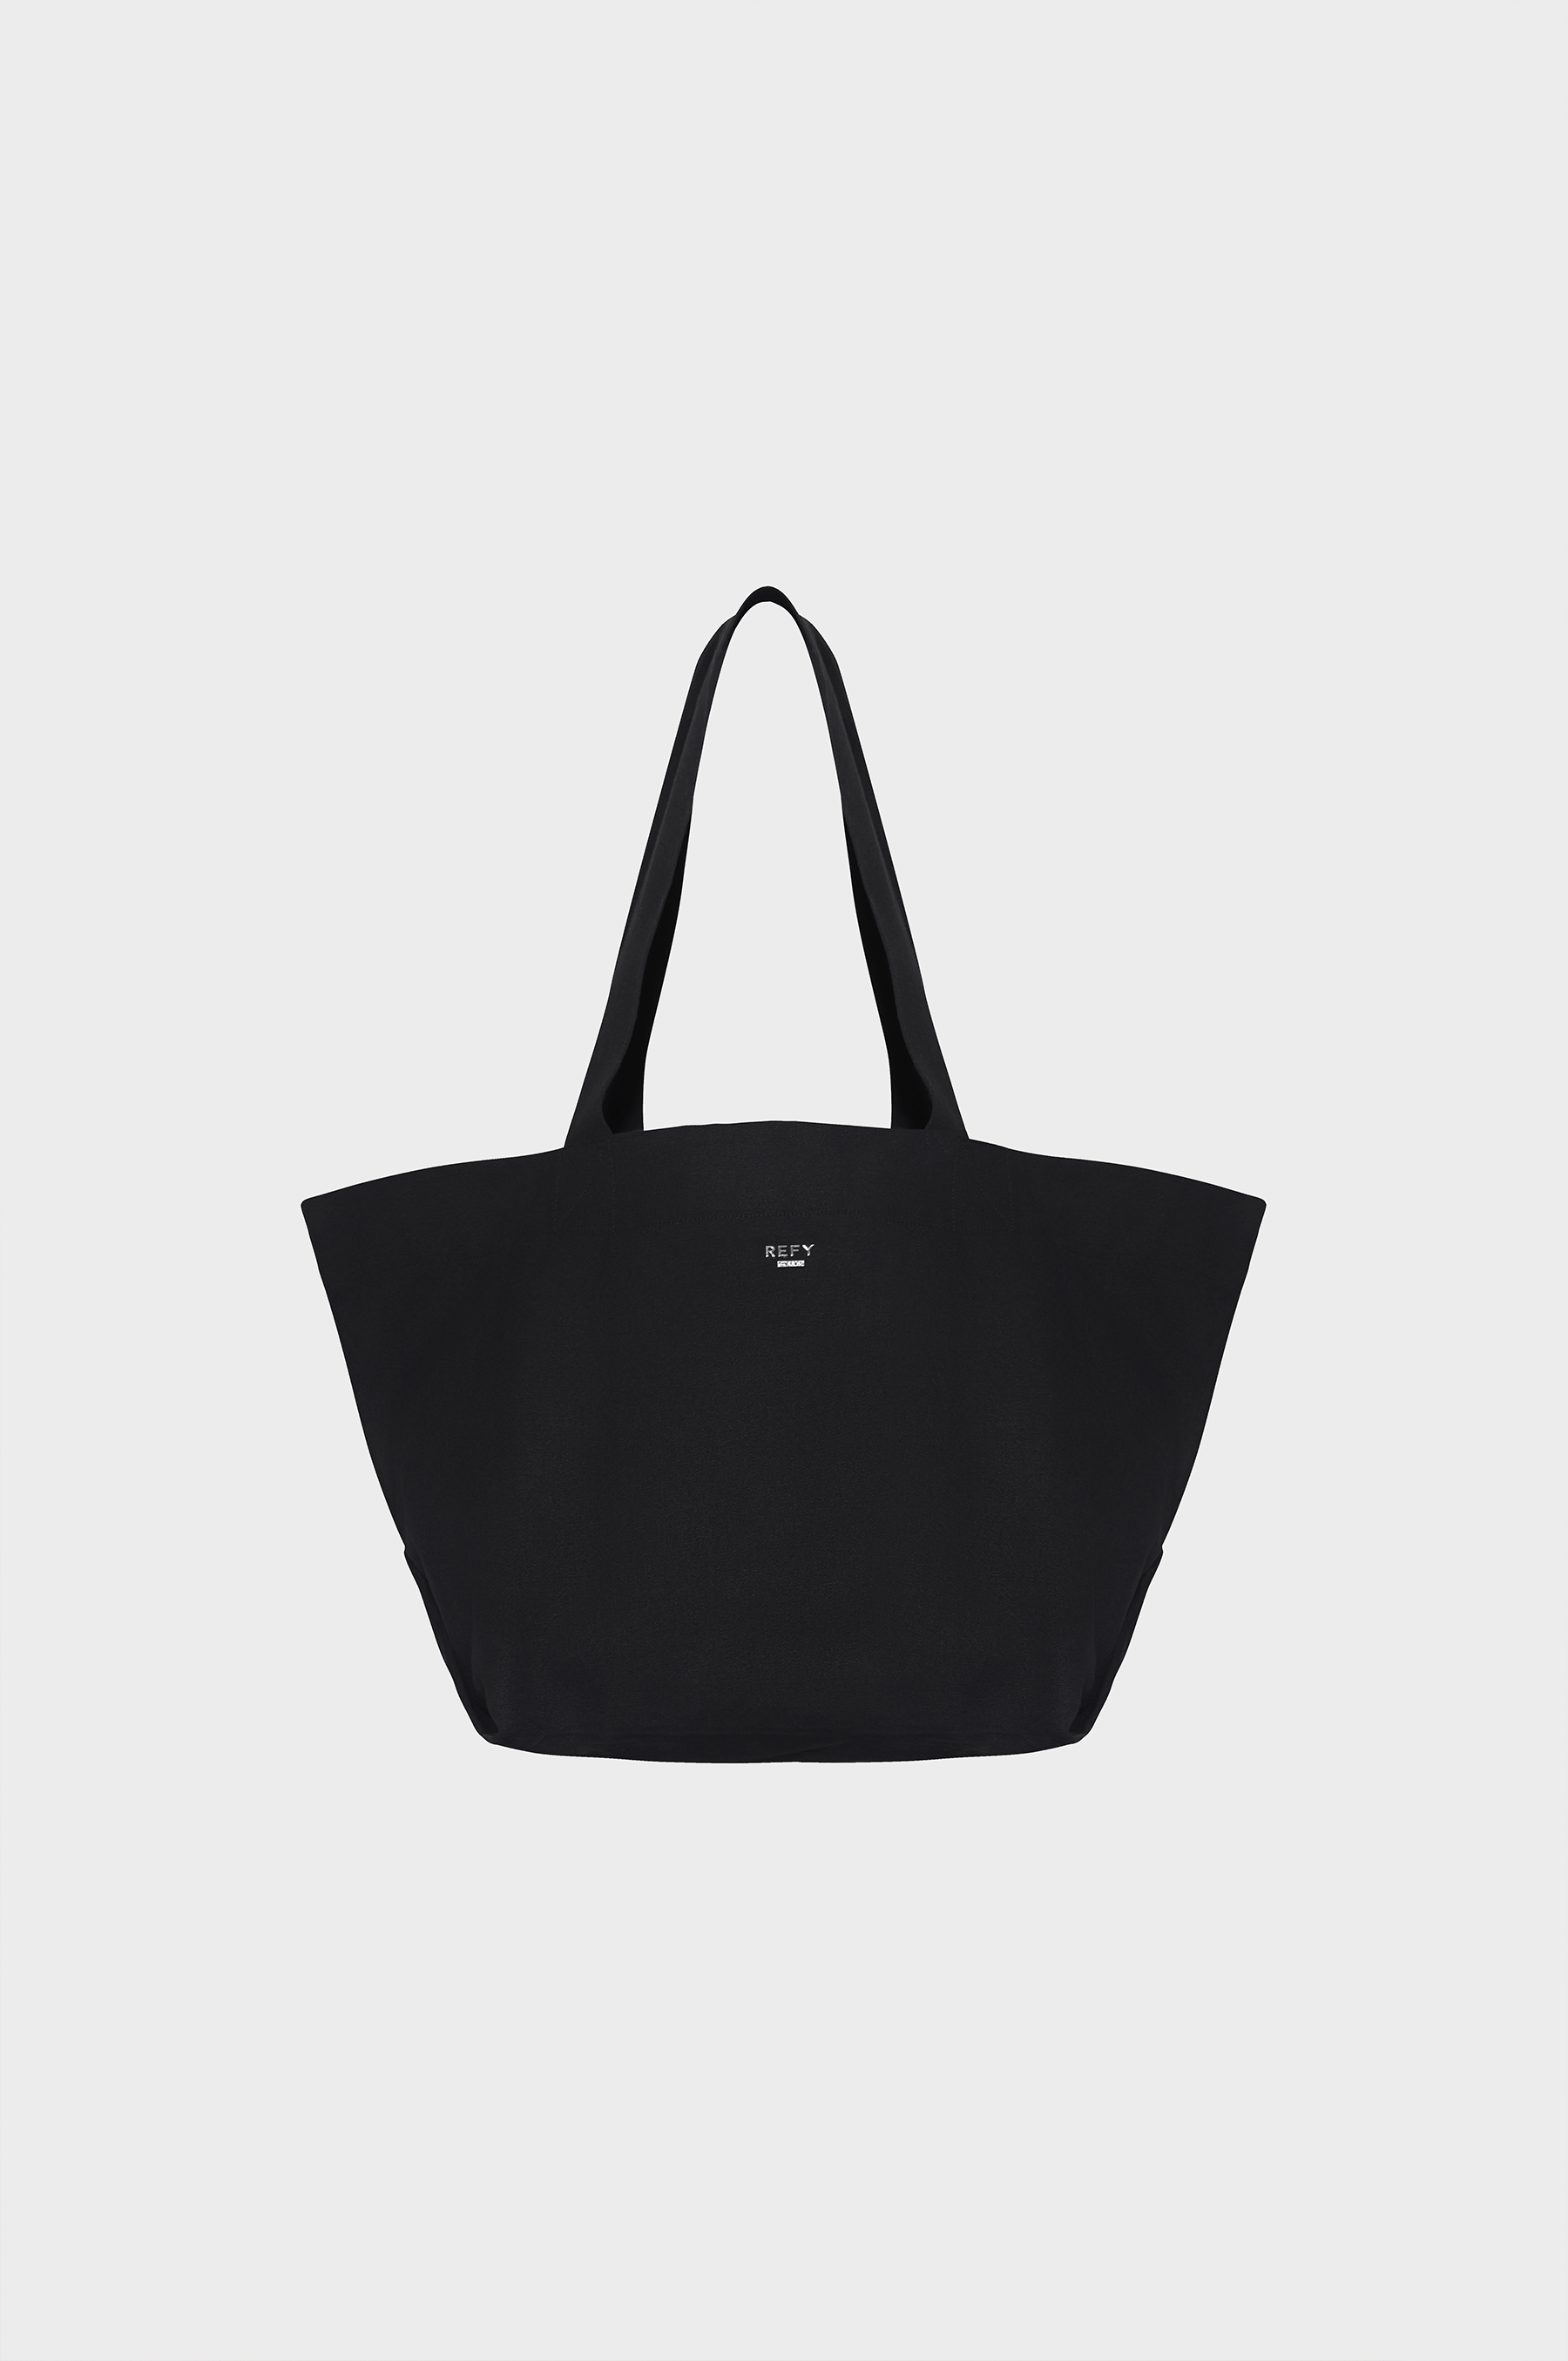 CLOSE UP OF REFY OVERSIZED TOTE BAG IN BLACK